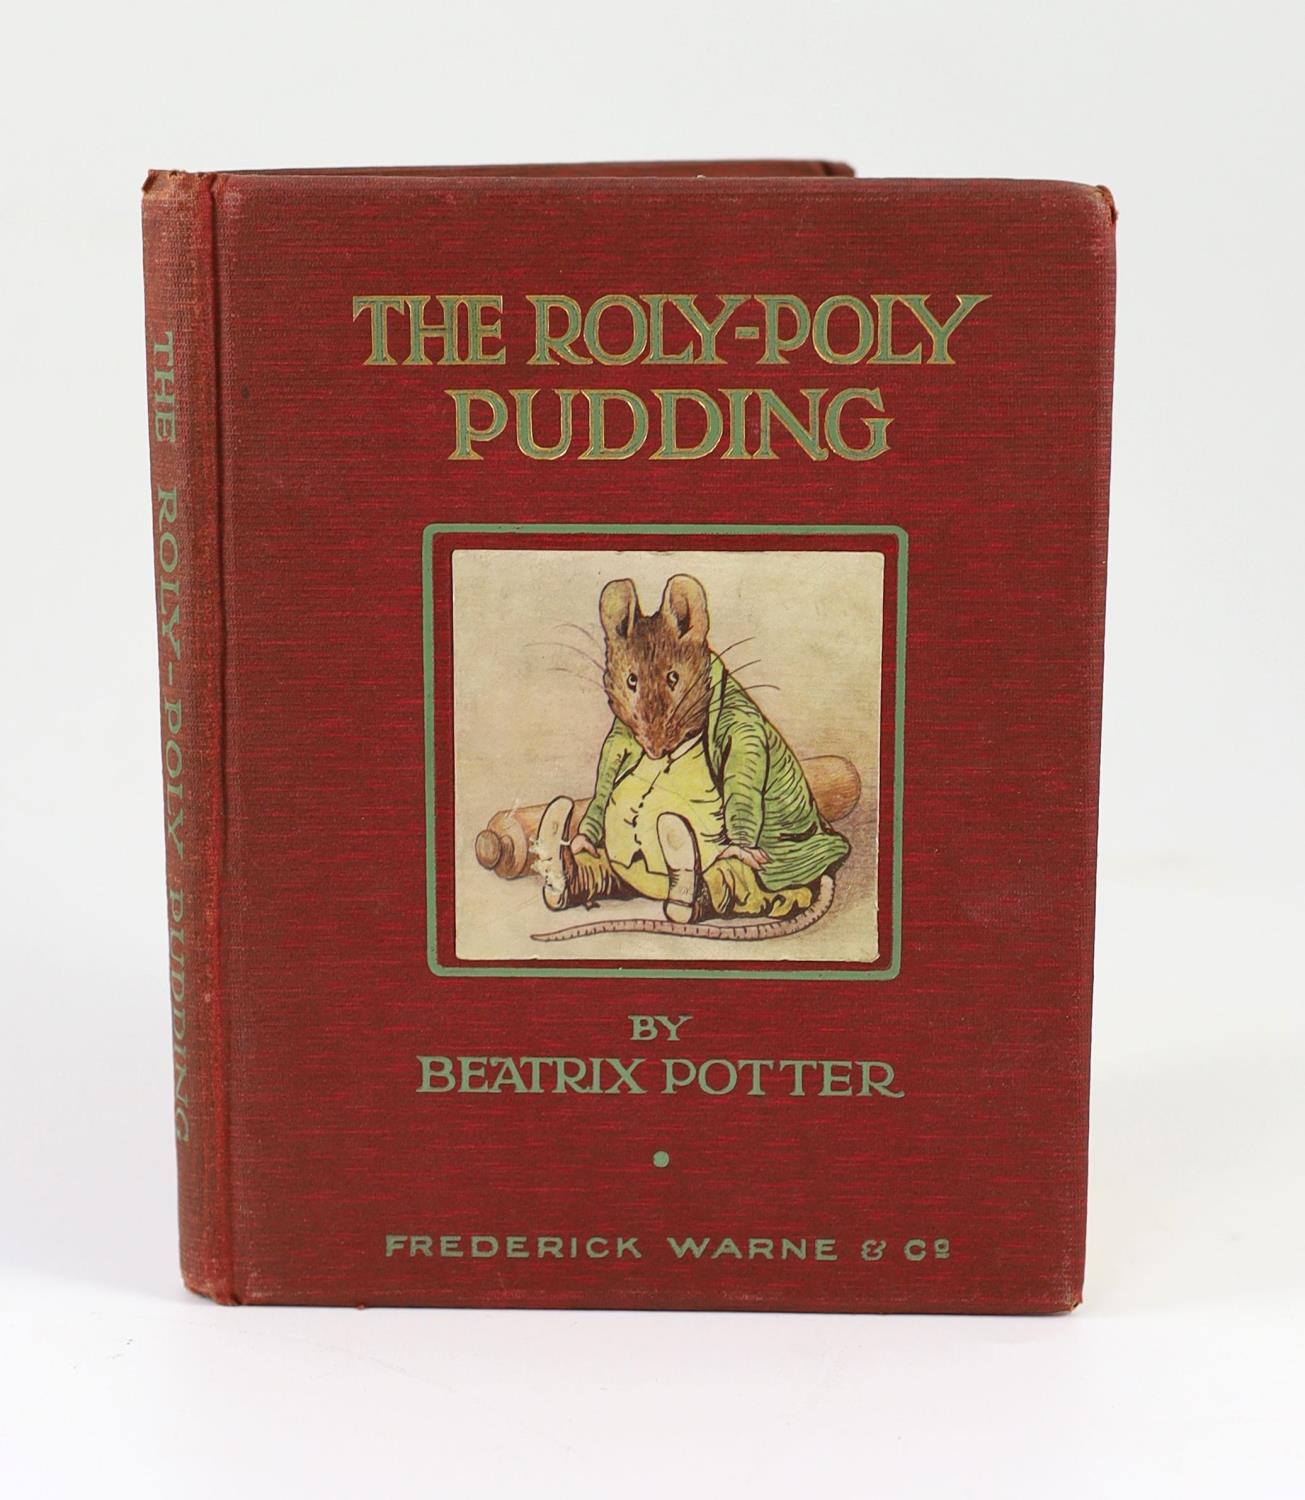 ° ° Potter, Beatrix - The Roly-Poly Pudding. First Edition (1st issue), coloured pictorial title, 18